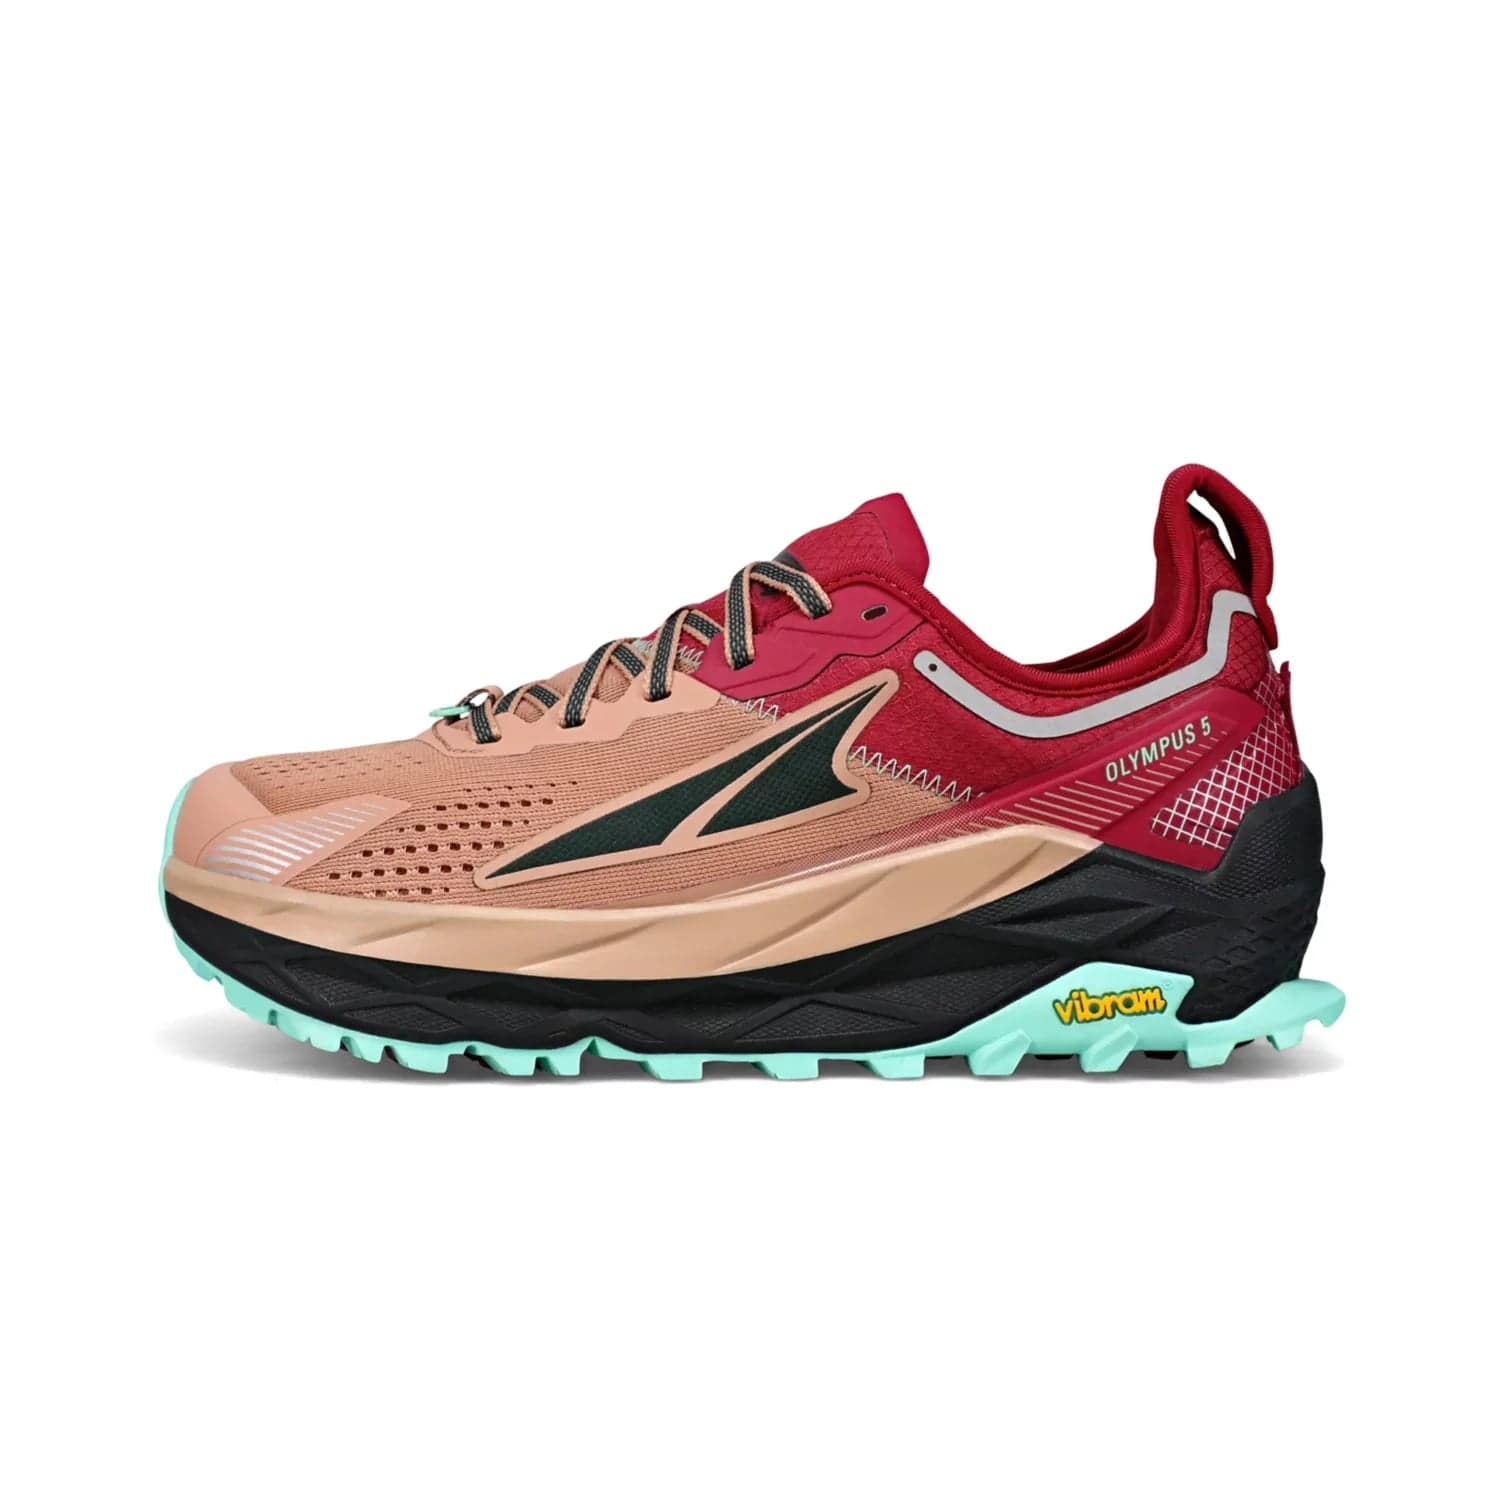 Altra Olympus 5 [Women's] Shoes - Blister Prevention